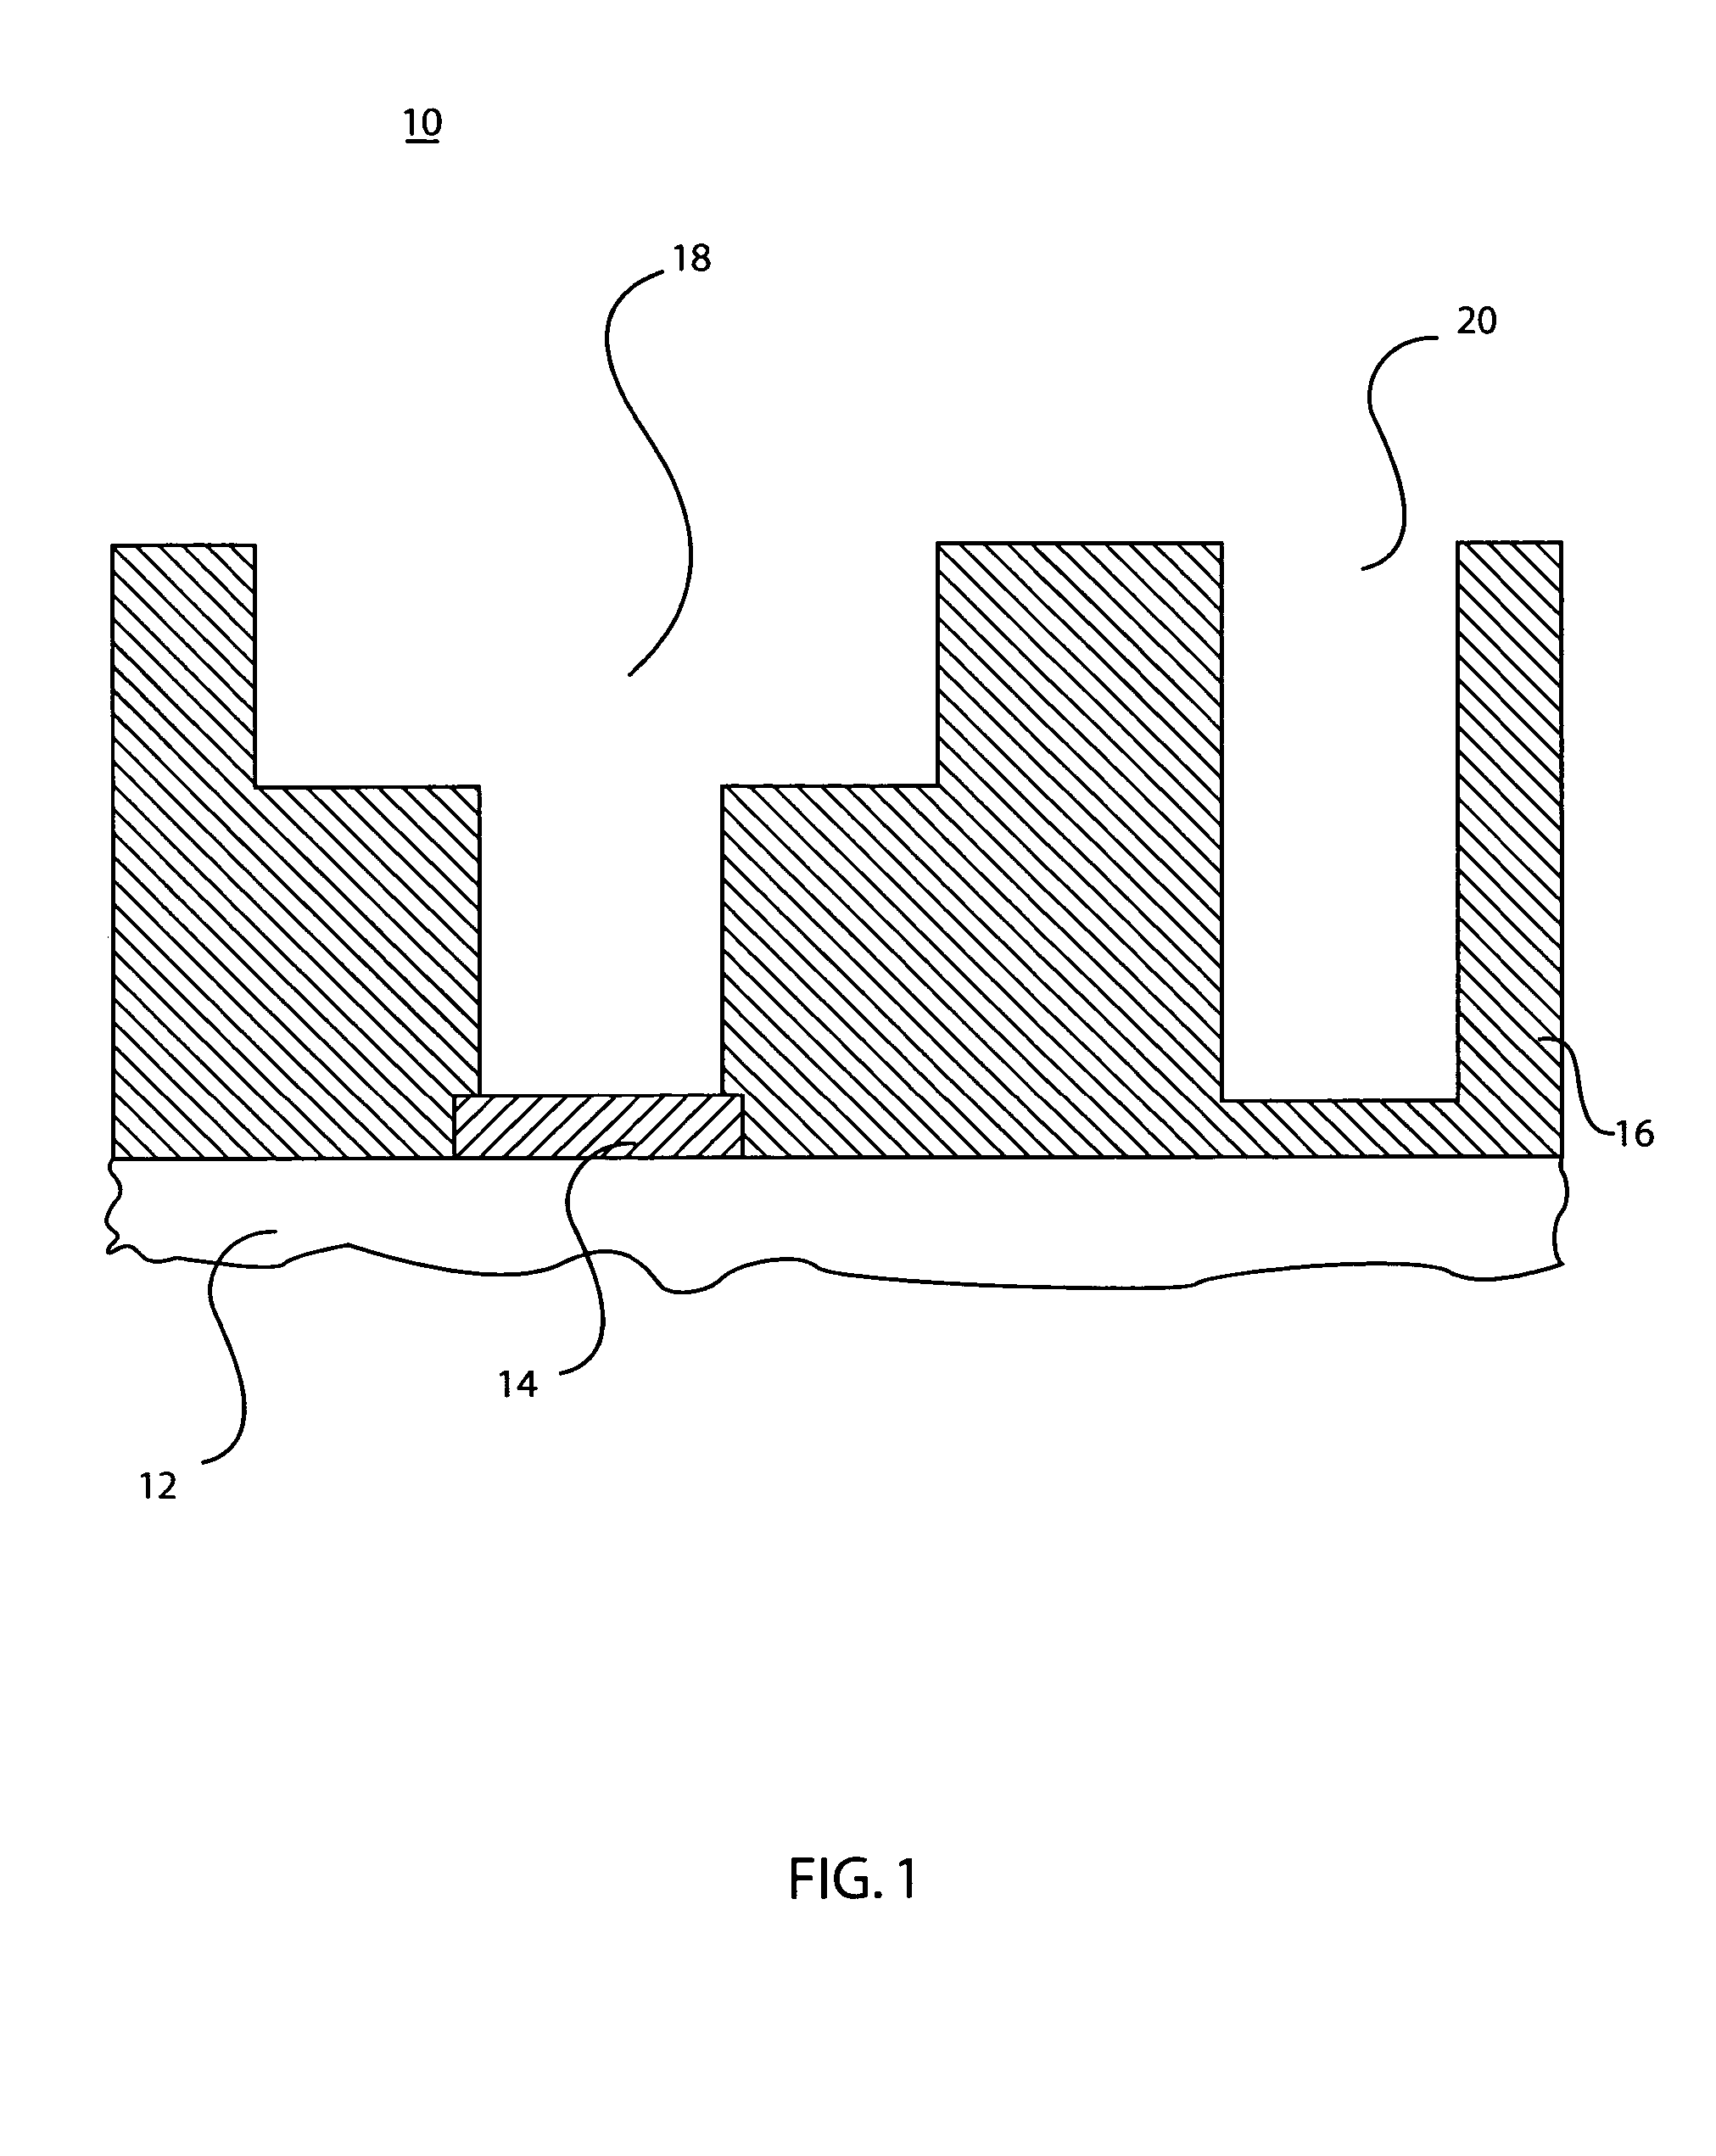 Diffusion barriers formed by low temperature deposition